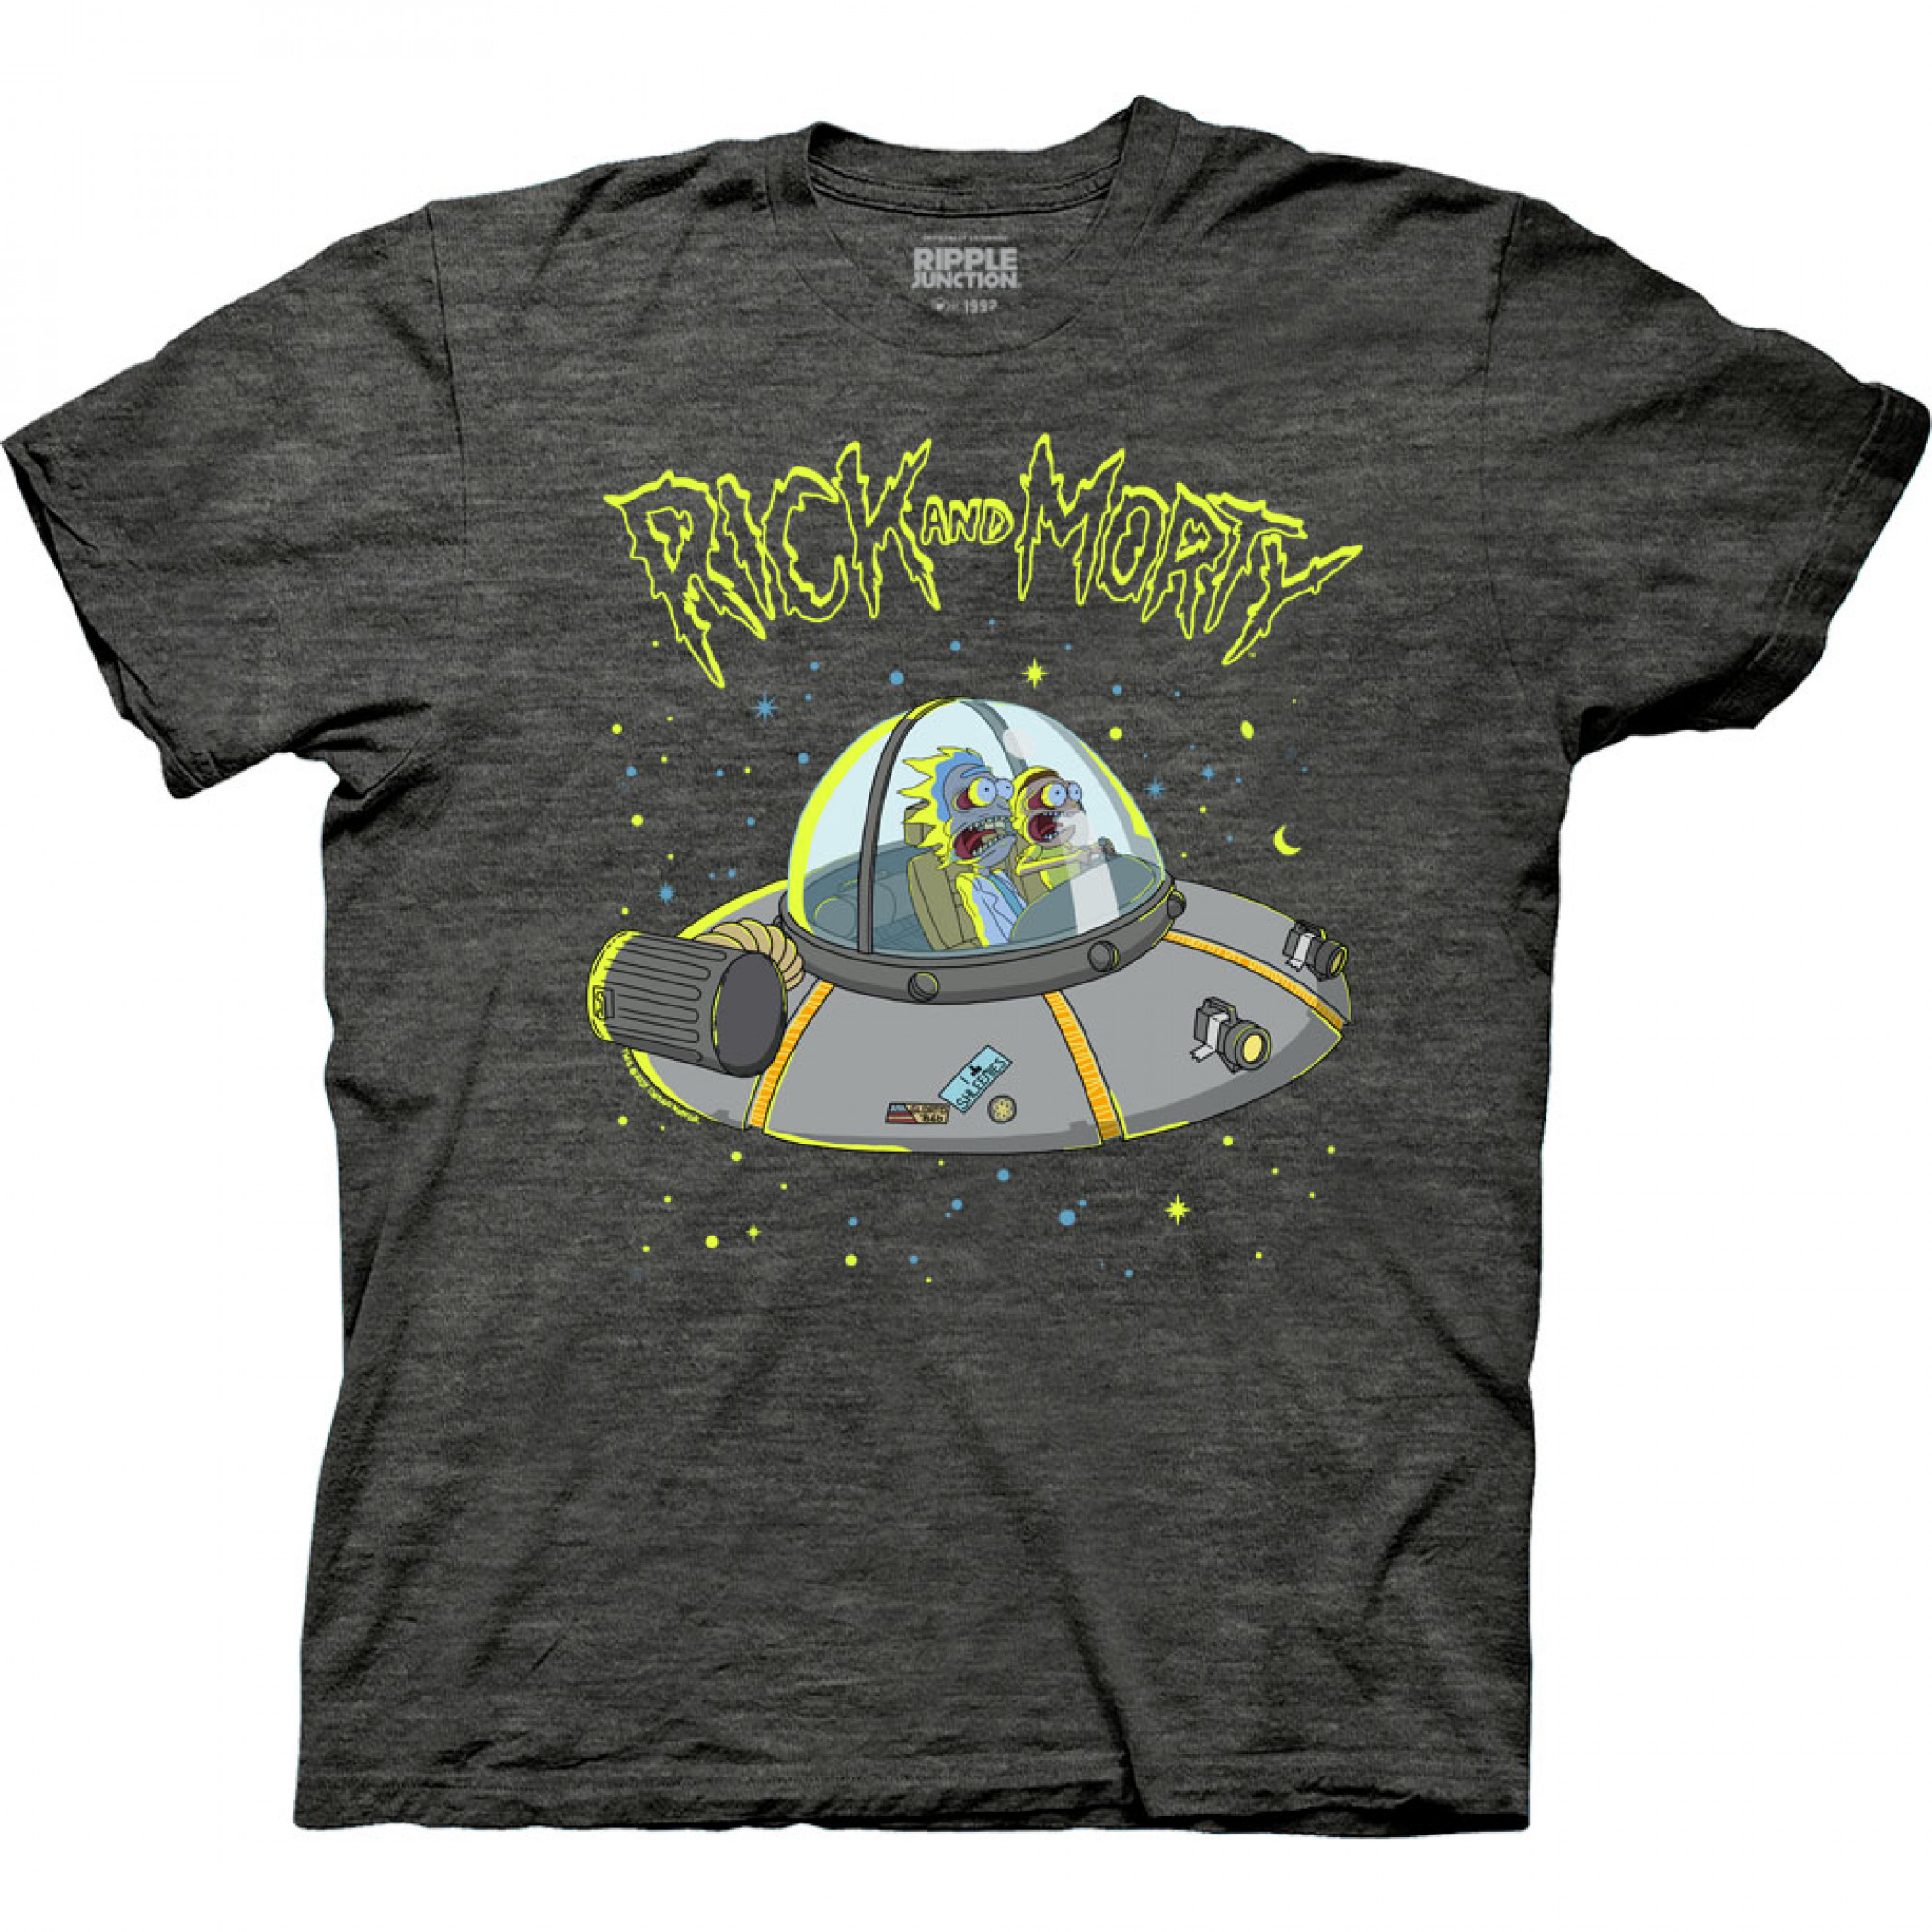 Rick and Morty Distorted Faces in Space Ship T-Shirt